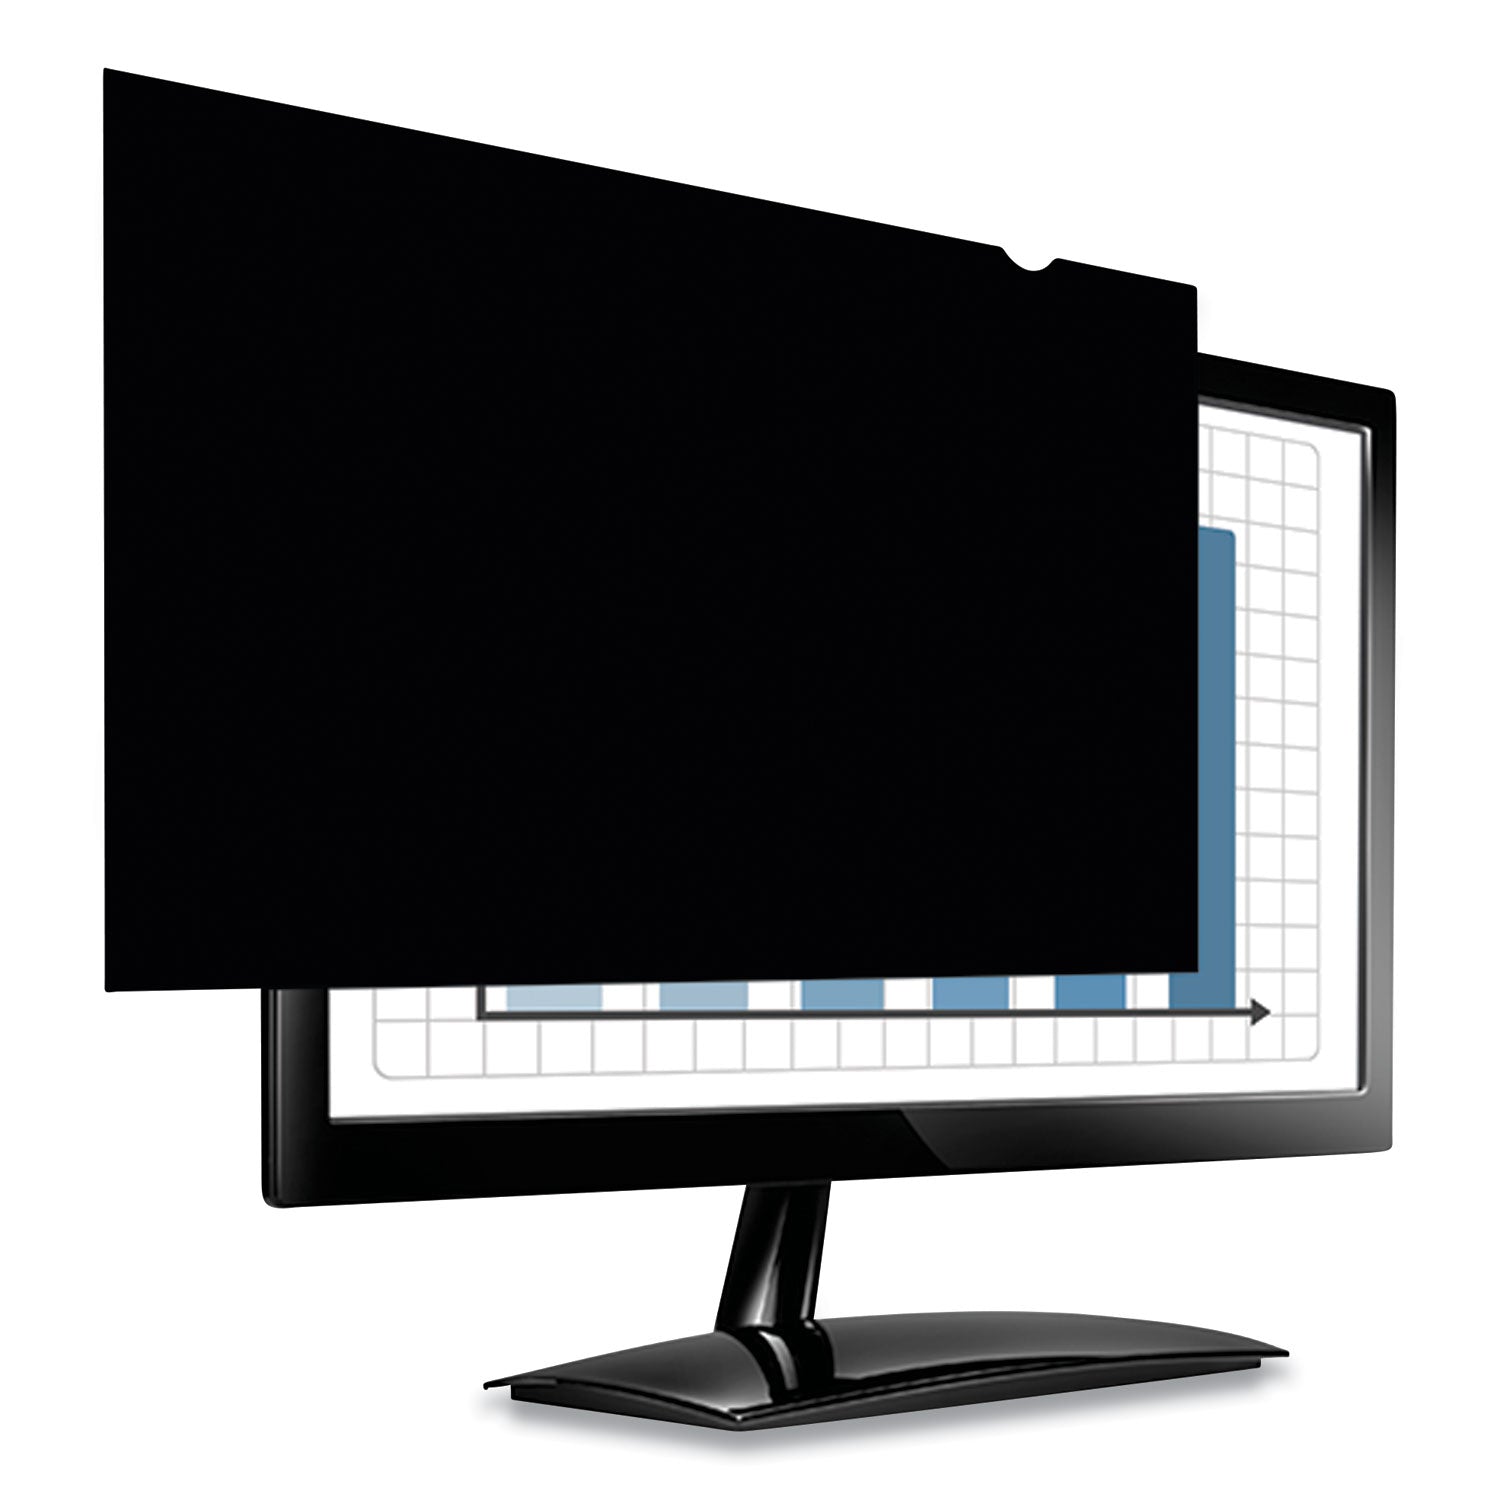 PrivaScreen Blackout Privacy Filter for 21.5" Widescreen Flat Panel Monitor, 16:9 Aspect Ratio - 